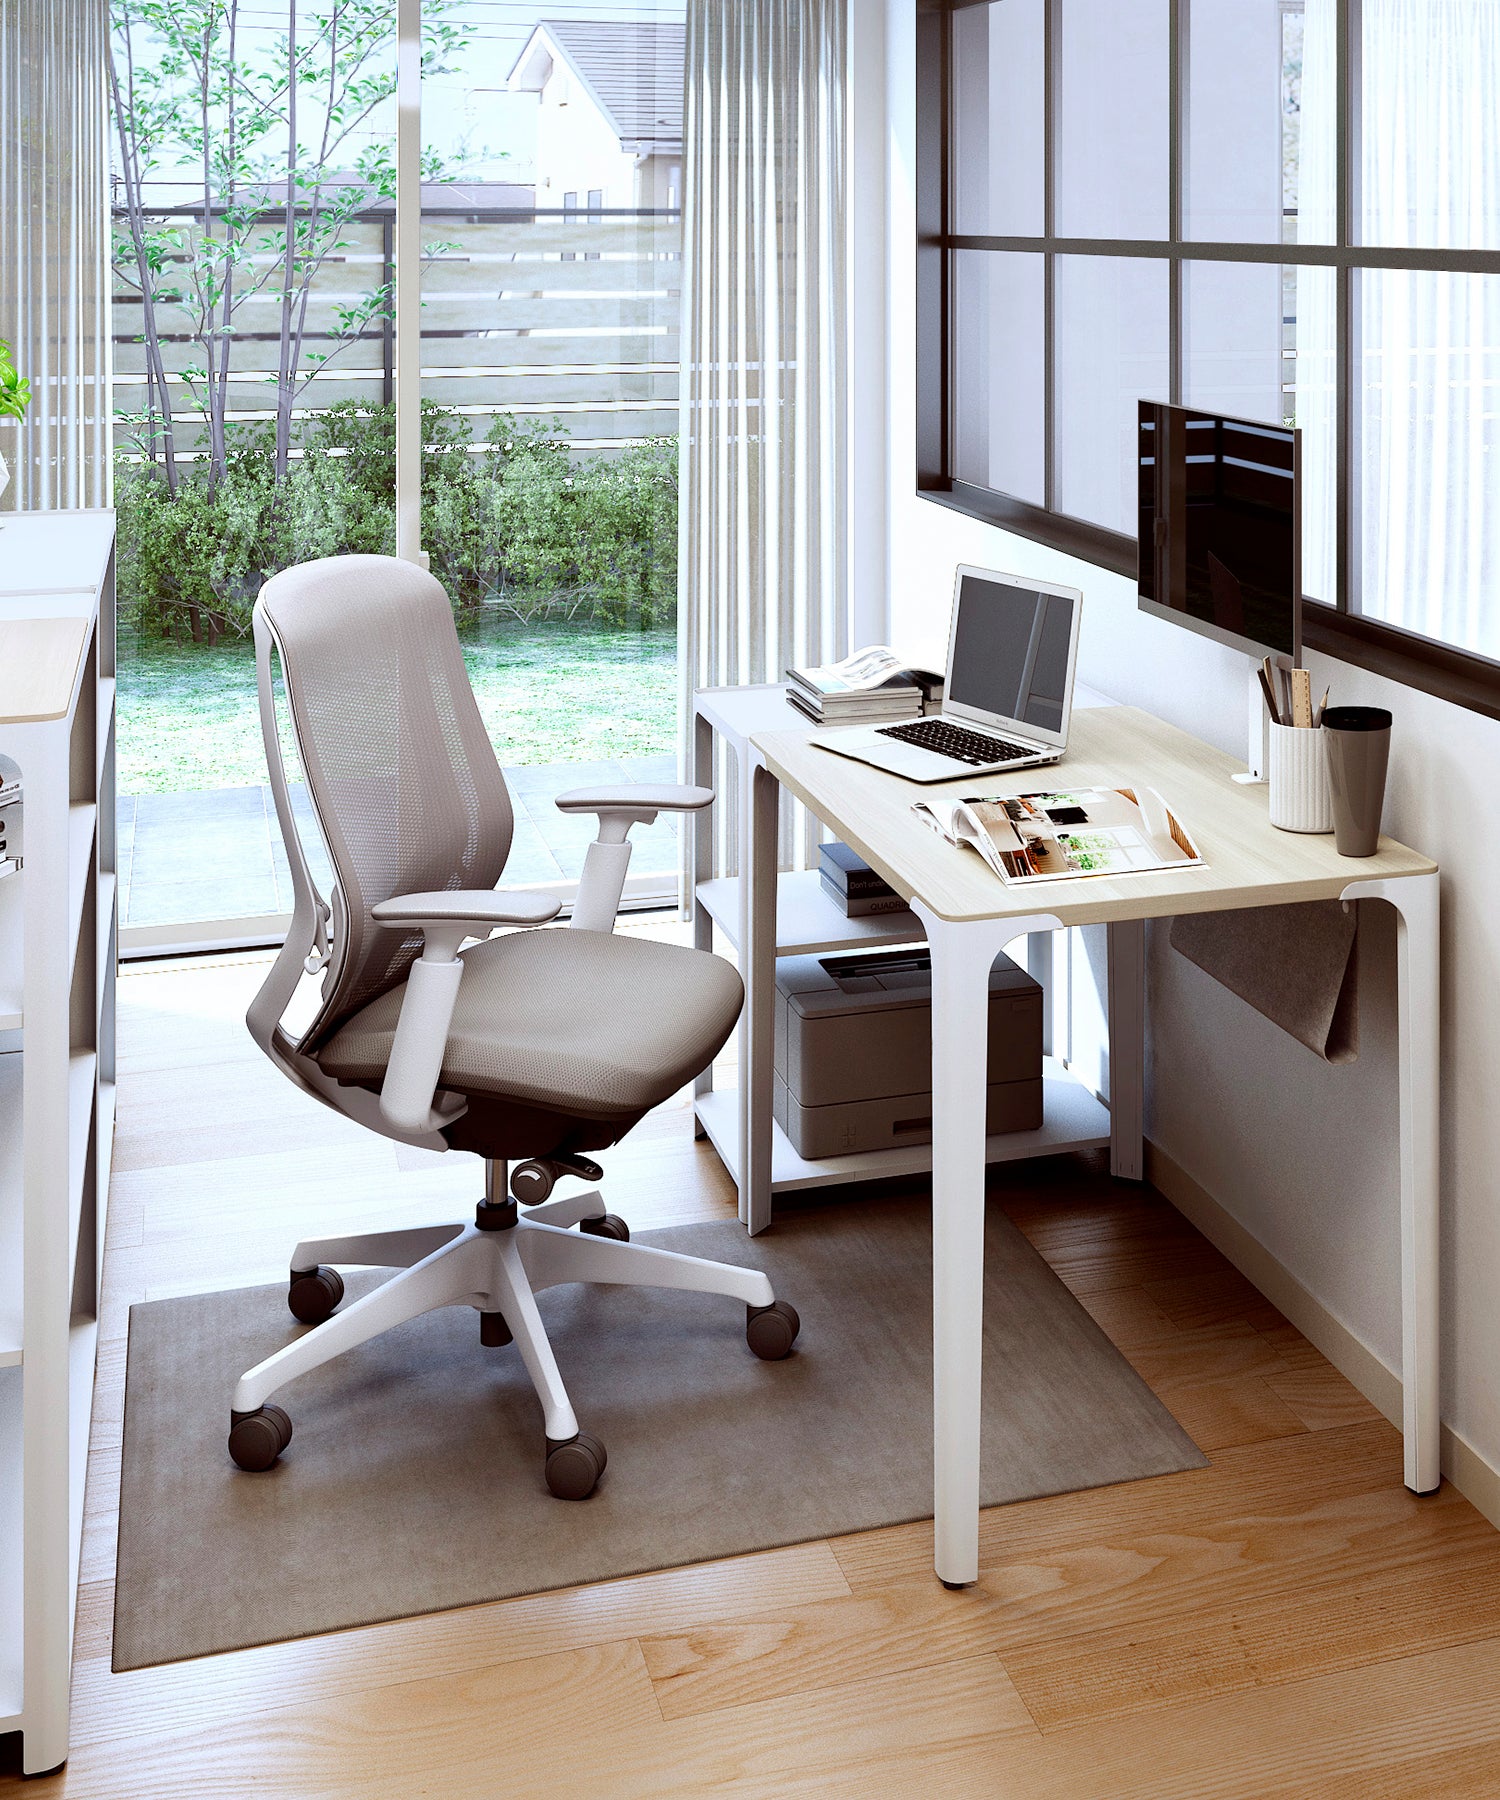 Sylphy grey office chair in home setting